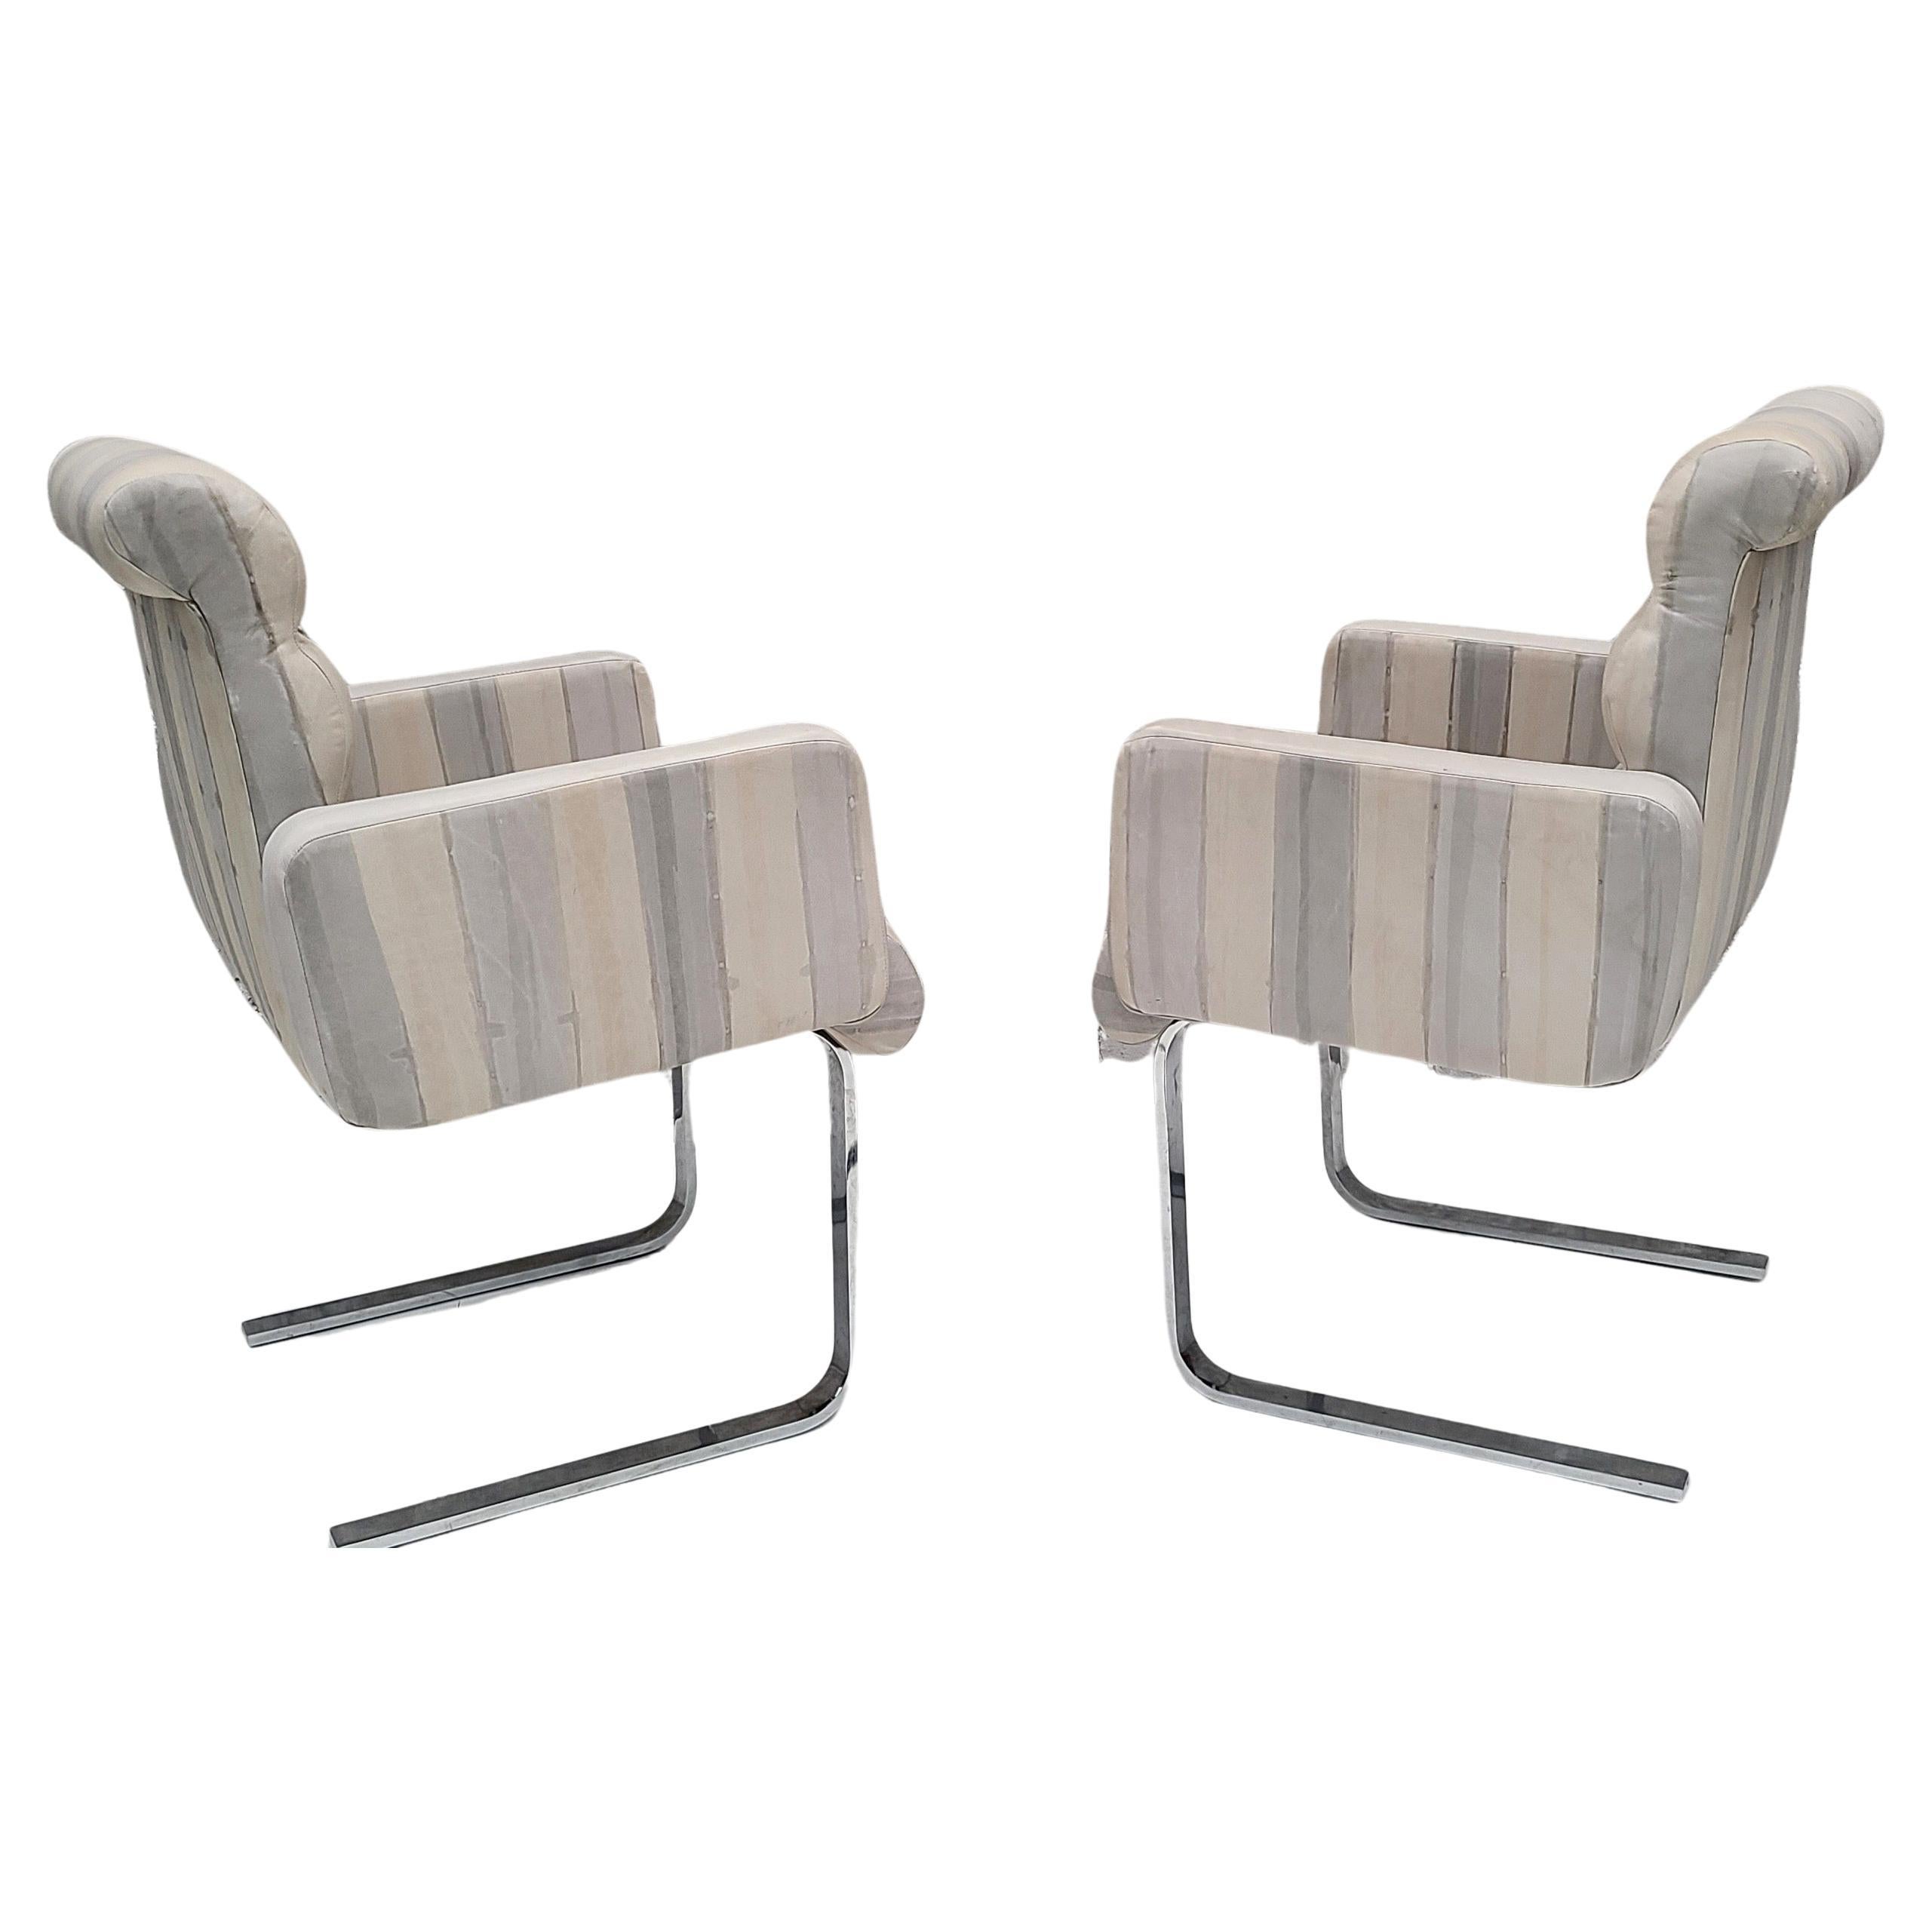 Please reach out for efficient shipping to your location.

Set of 4 striped leather and chrome dining armchairs by Preview.